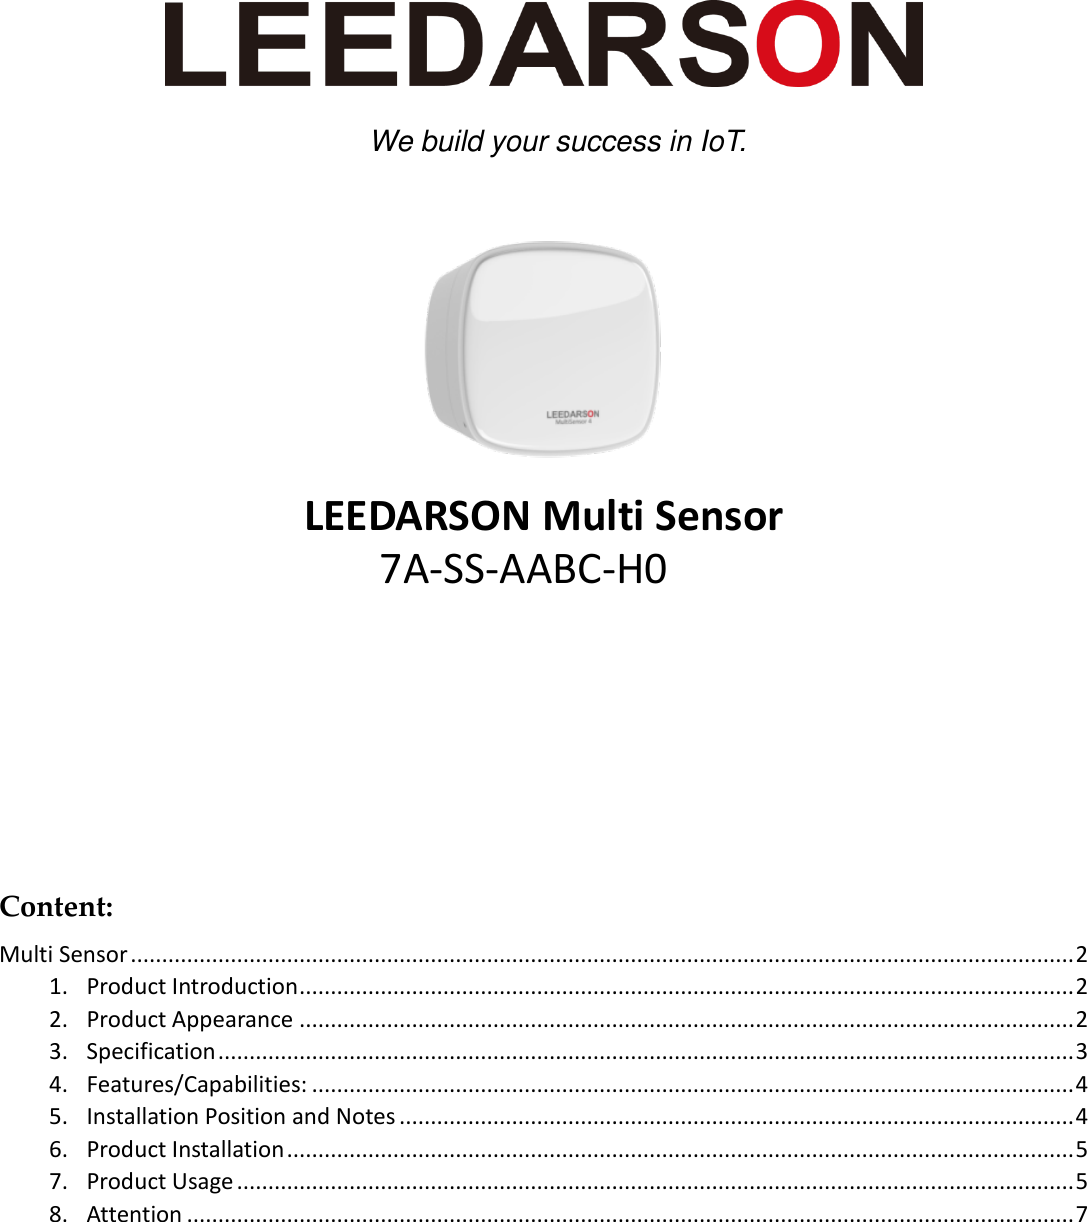      LEEDARSON Multi Sensor      Content: Multi Sensor ....................................................................................................................................................... 2 1. Product Introduction ............................................................................................................................ 2 2. Product Appearance ............................................................................................................................ 2 3. Specification ......................................................................................................................................... 3 4. Features/Capabilities: .......................................................................................................................... 4 5. Installation Position and Notes ............................................................................................................ 4 6. Product Installation .............................................................................................................................. 5 7. Product Usage ...................................................................................................................................... 5 8. Attention .............................................................................................................................................. 7   We build your success in IoT. 7A-SS-AABC-H0